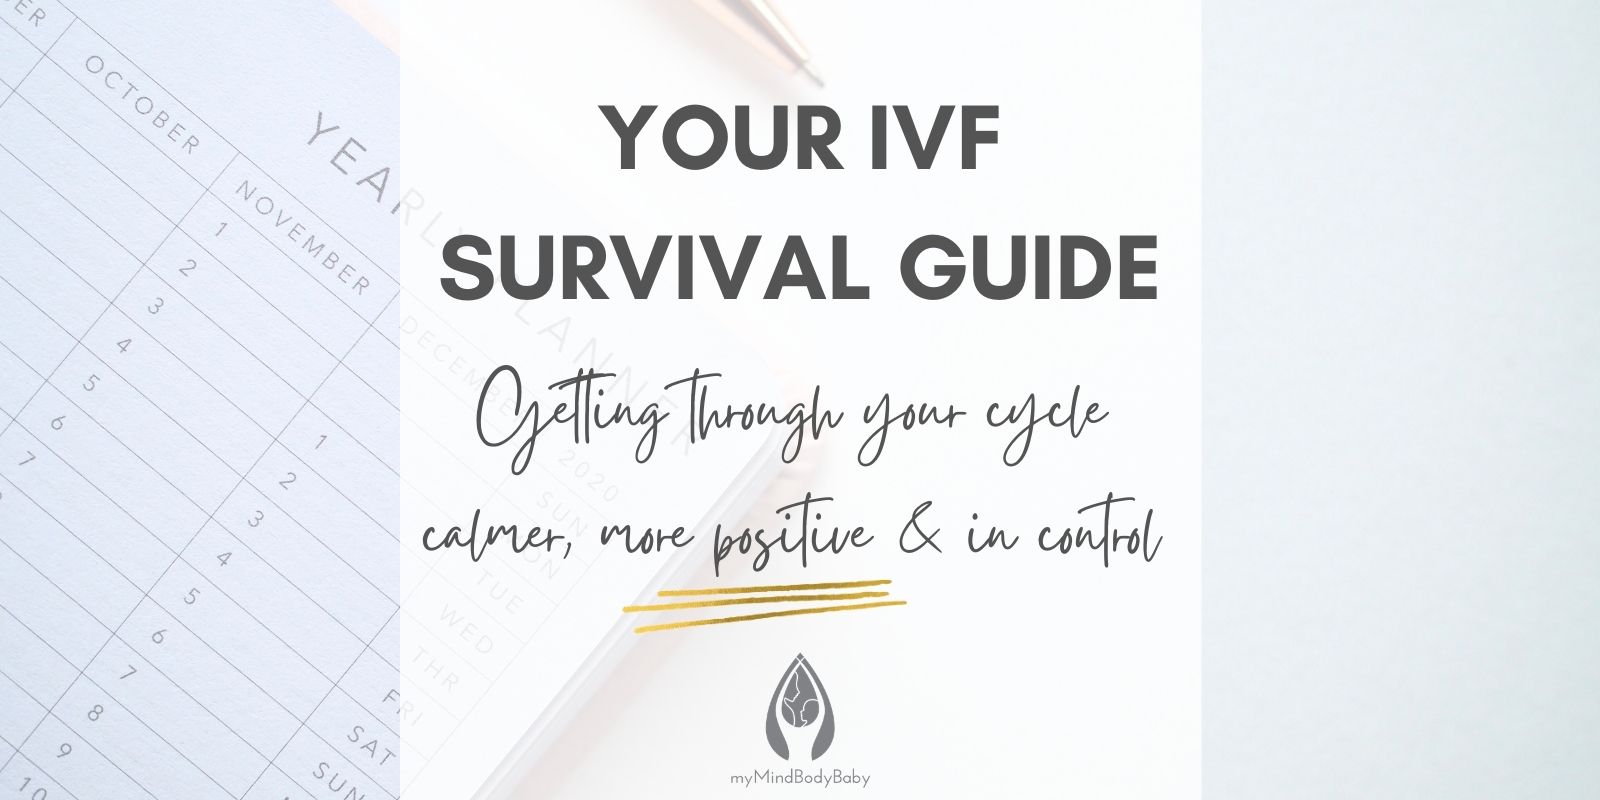 Your IVF Survival Guide